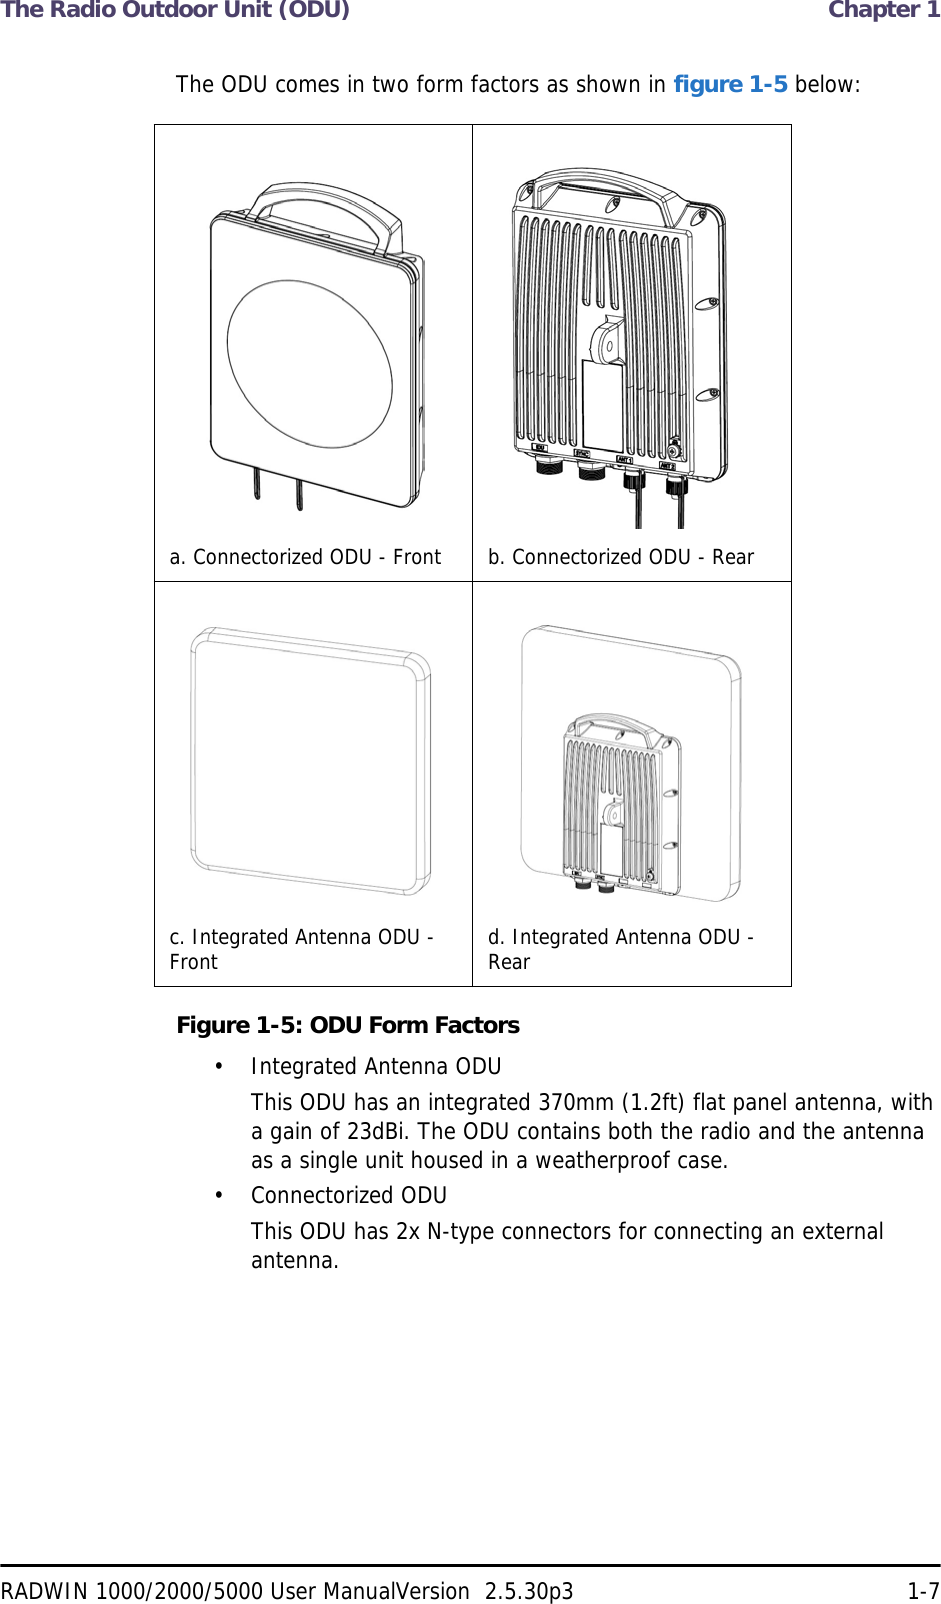 The Radio Outdoor Unit (ODU)  Chapter 1RADWIN 1000/2000/5000 User ManualVersion  2.5.30p3 1-7The ODU comes in two form factors as shown in figure 1-5 below:Figure 1-5: ODU Form Factors• Integrated Antenna ODUThis ODU has an integrated 370mm (1.2ft) flat panel antenna, with a gain of 23dBi. The ODU contains both the radio and the antenna as a single unit housed in a weatherproof case.• Connectorized ODUThis ODU has 2x N-type connectors for connecting an external antenna.a. Connectorized ODU - Front b. Connectorized ODU - Rearc. Integrated Antenna ODU - Front d. Integrated Antenna ODU - Rear